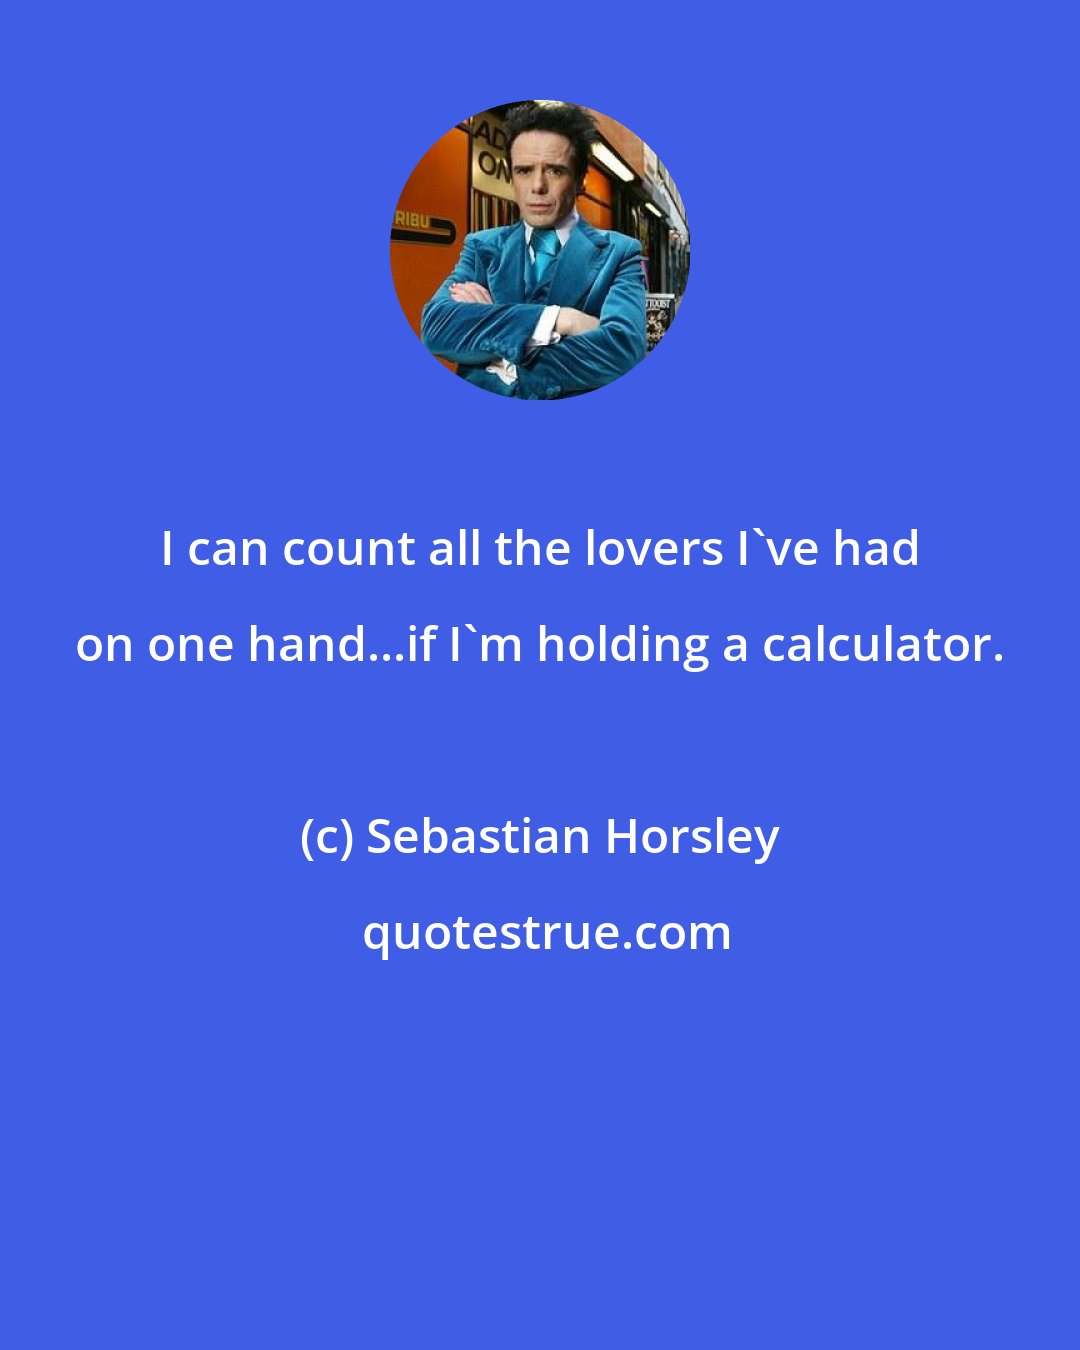 Sebastian Horsley: I can count all the lovers I've had on one hand...if I'm holding a calculator.